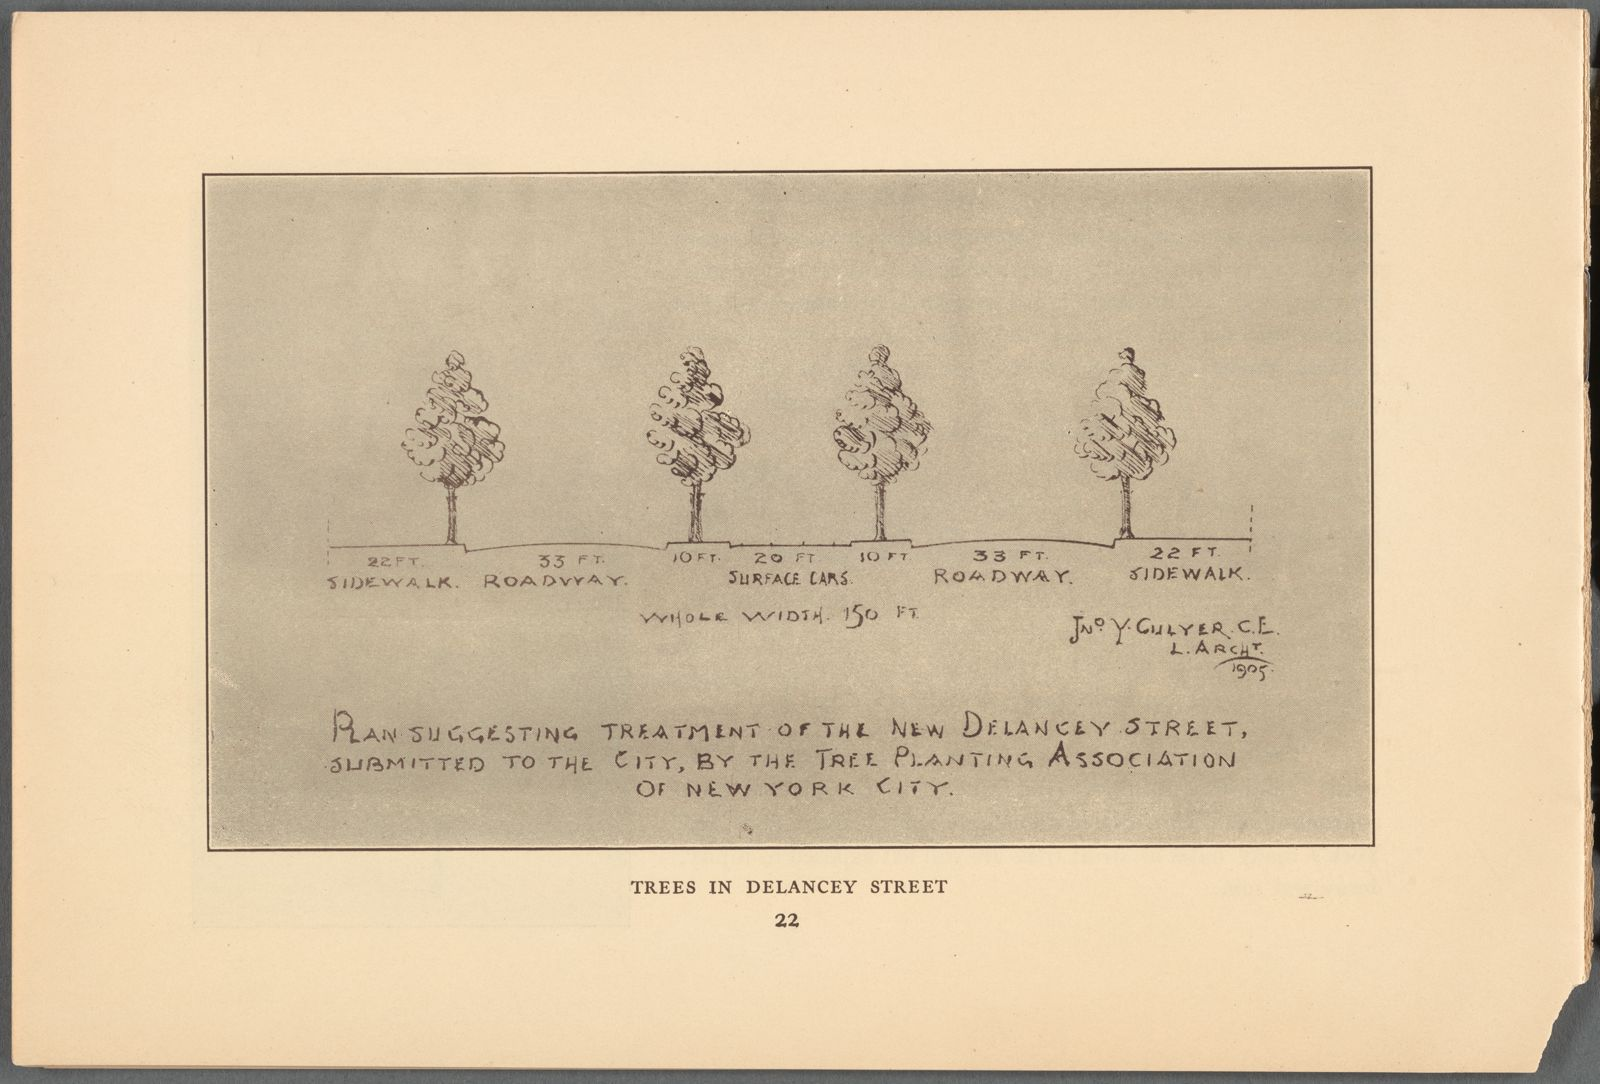 Archival sketch labeled "Trees In Delancey Street". A diagram shows four sidewalk trees separated by roadways.  